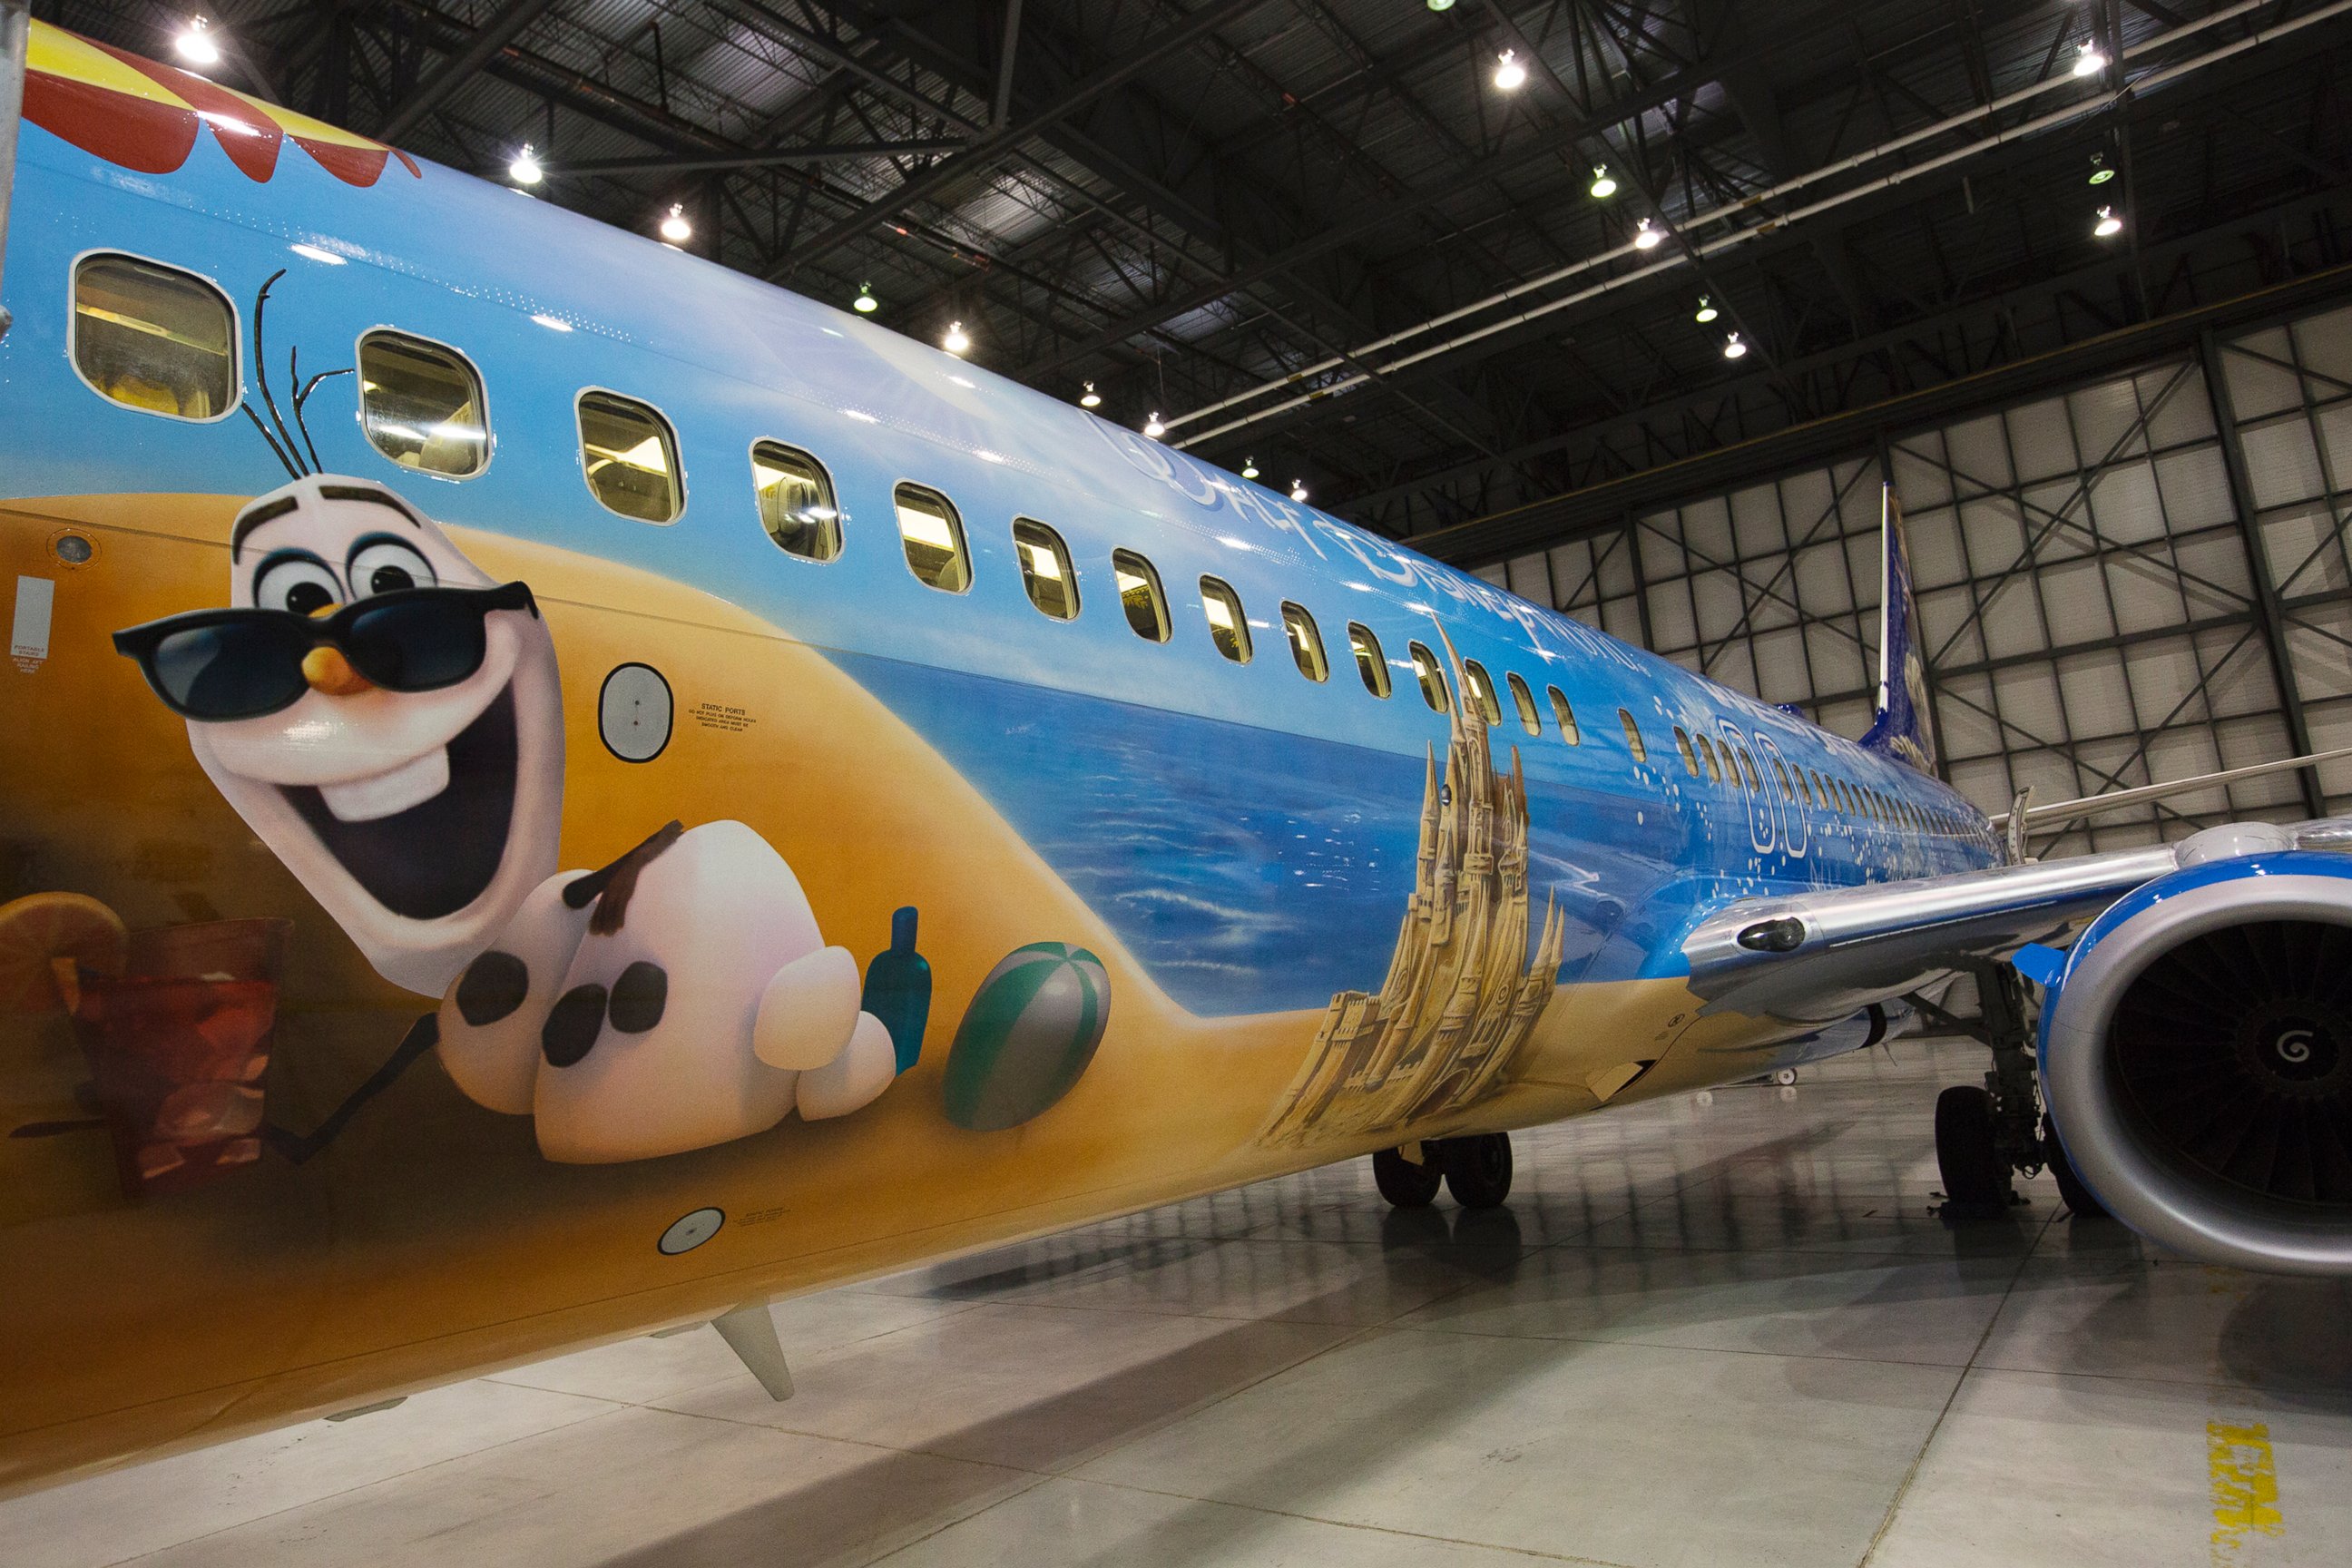 PHOTO: On Oct. 18, 2015, WestJet announced a custom-painted aircraft decorated with characters from the Disney film, "Frozen." 